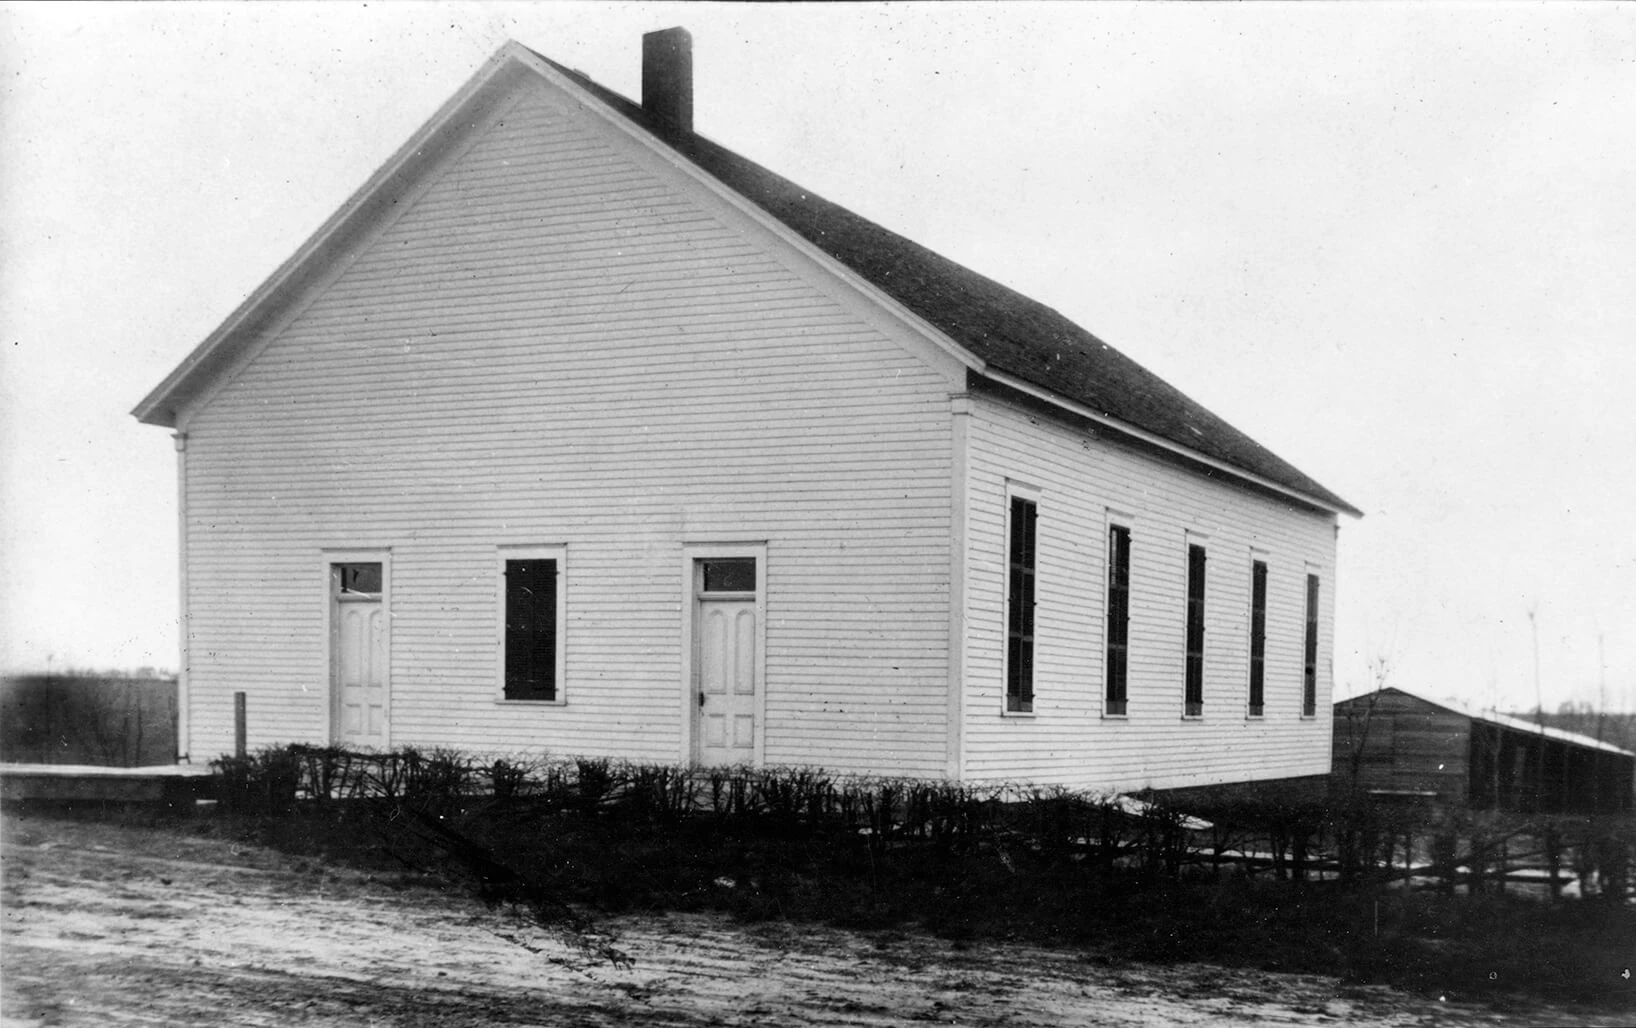 Black and white photo of a wooden church with a high pitched roof and chimney. Two doors and a window on the front, five windows on the side. Low shrubbery in the foreground.